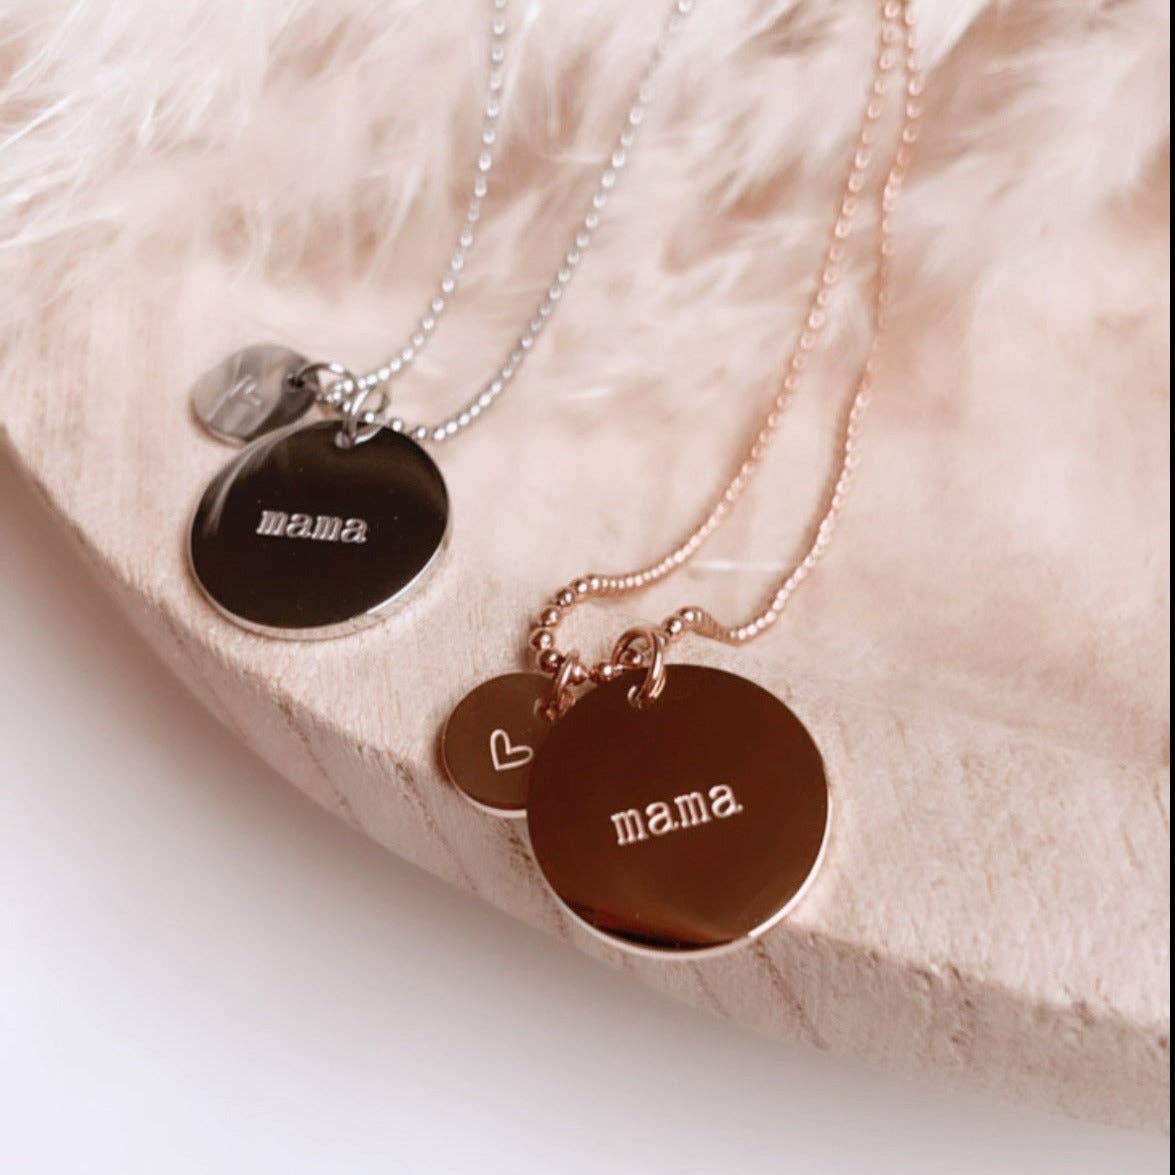 "MOM" COIN CHARM NECKLACE - rose gold or silver